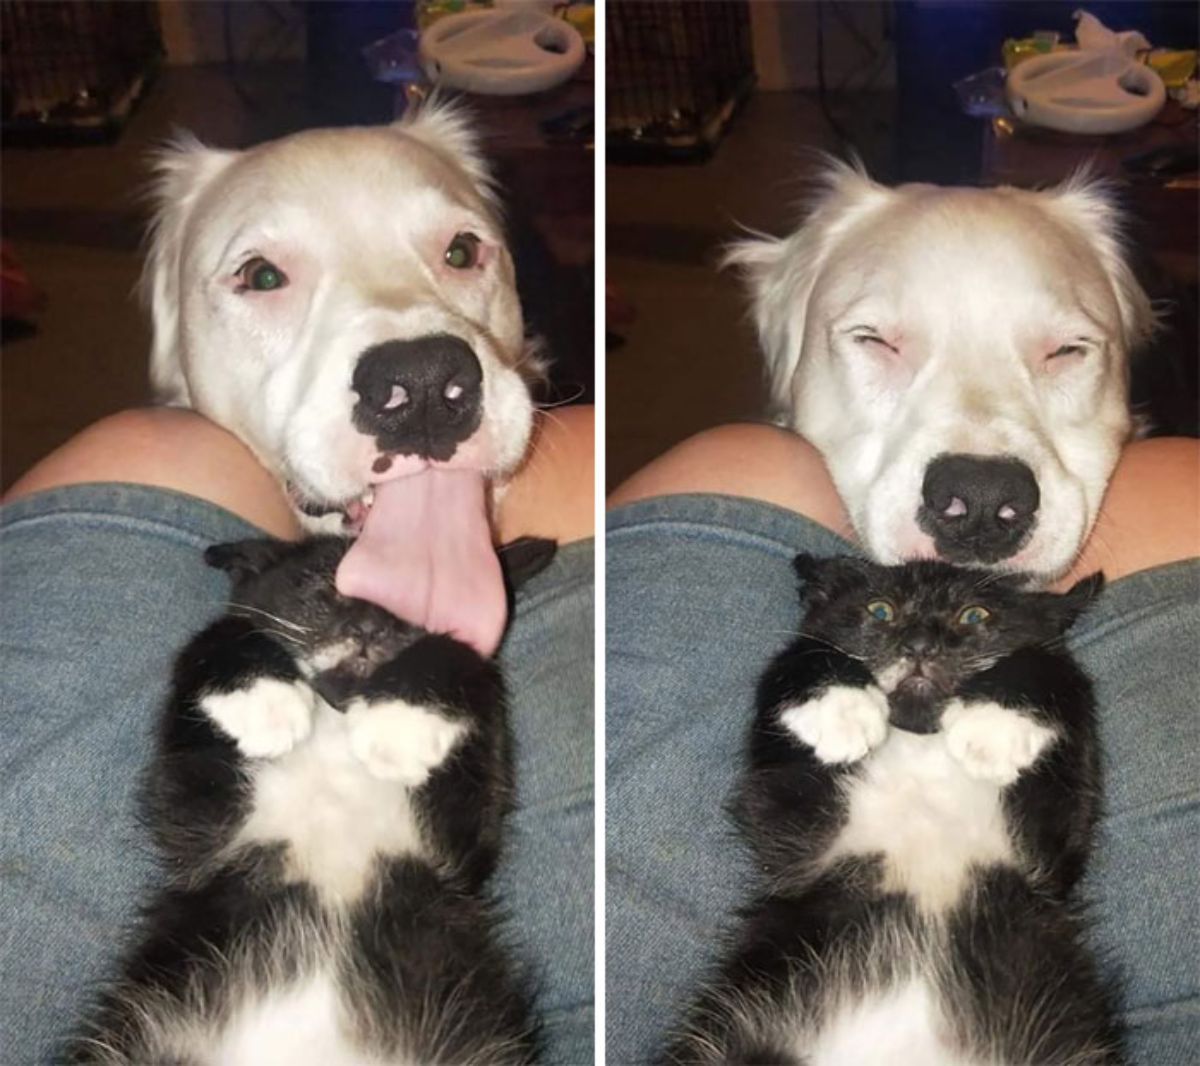 2 photos of a black and white cat laying belly up on someone's lap and a white dog licking the cat on the head and face